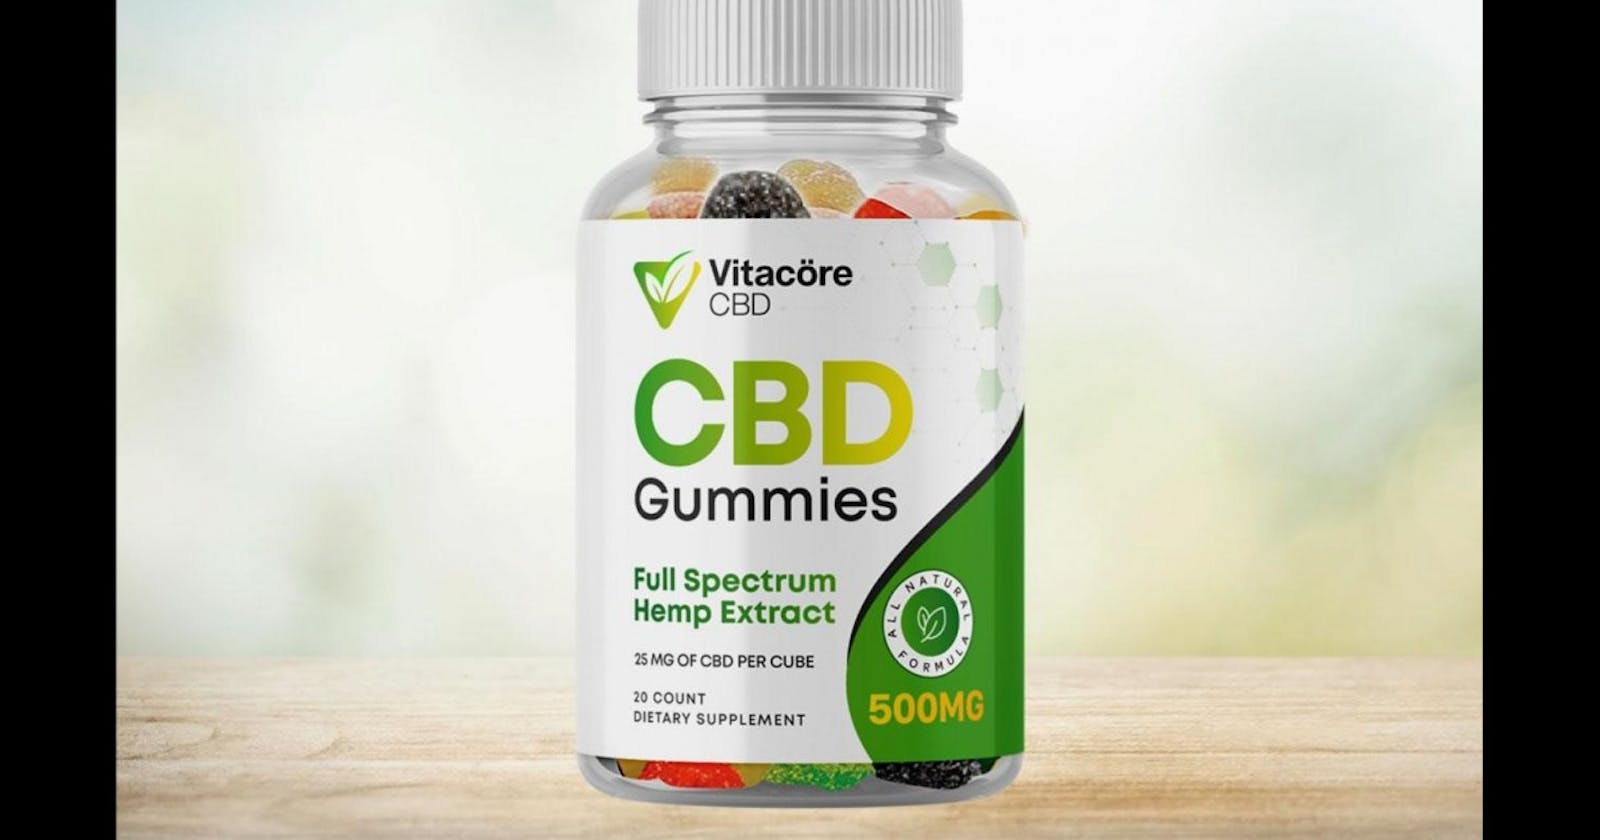 Vitacore CBD Gummies - Effective Product Good For You, Where To Buy!